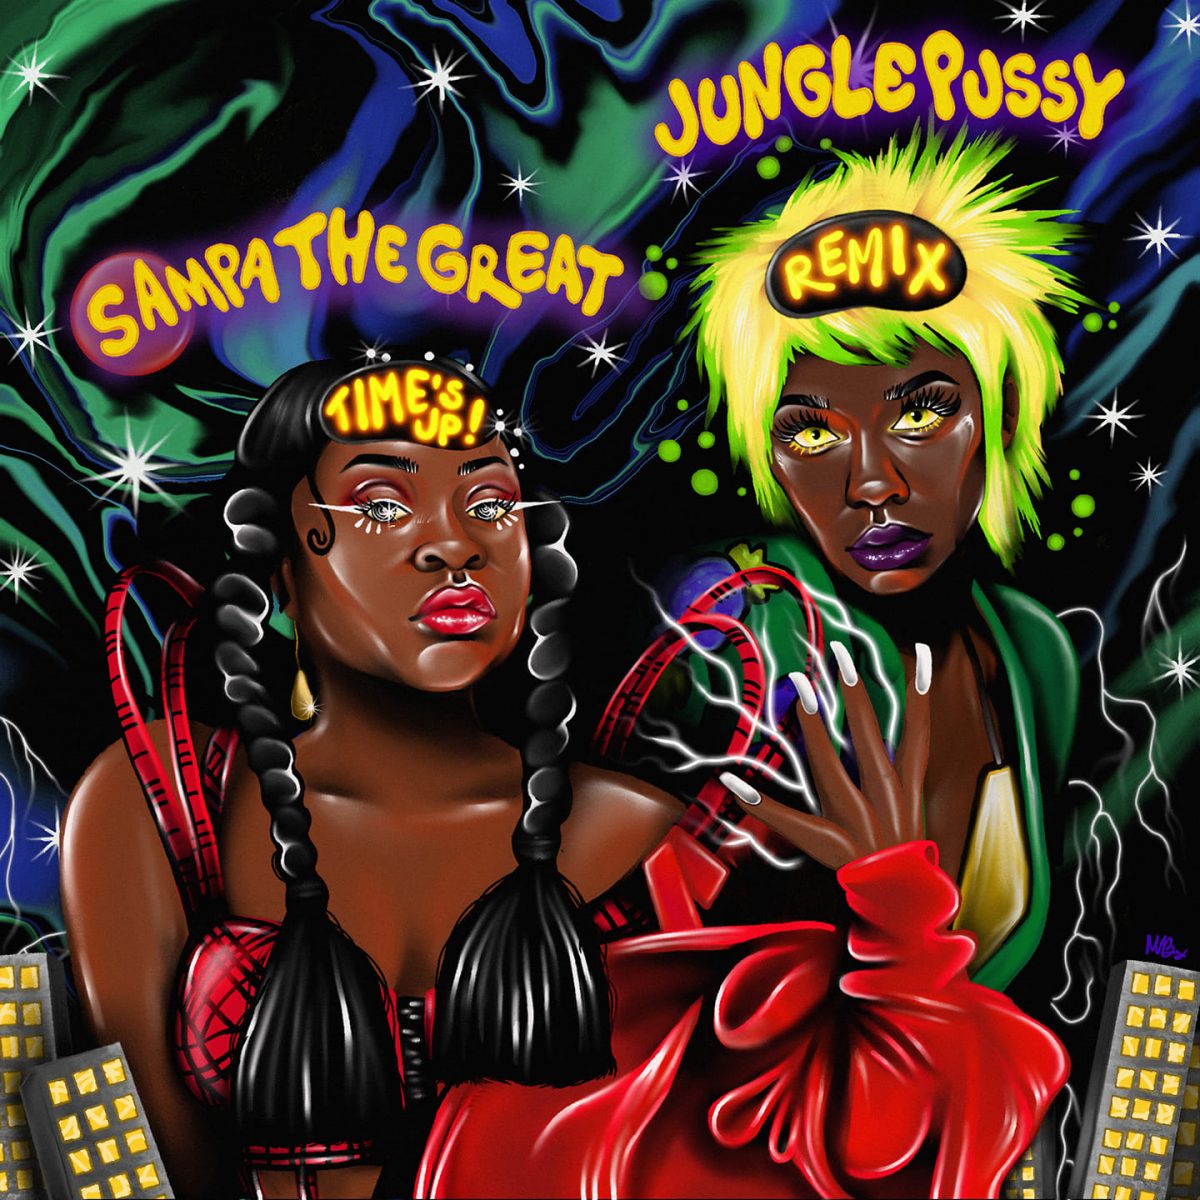 DOWNLOAD Sampa-The-Great-ft.-Junglepussy-Times-Up-Remix